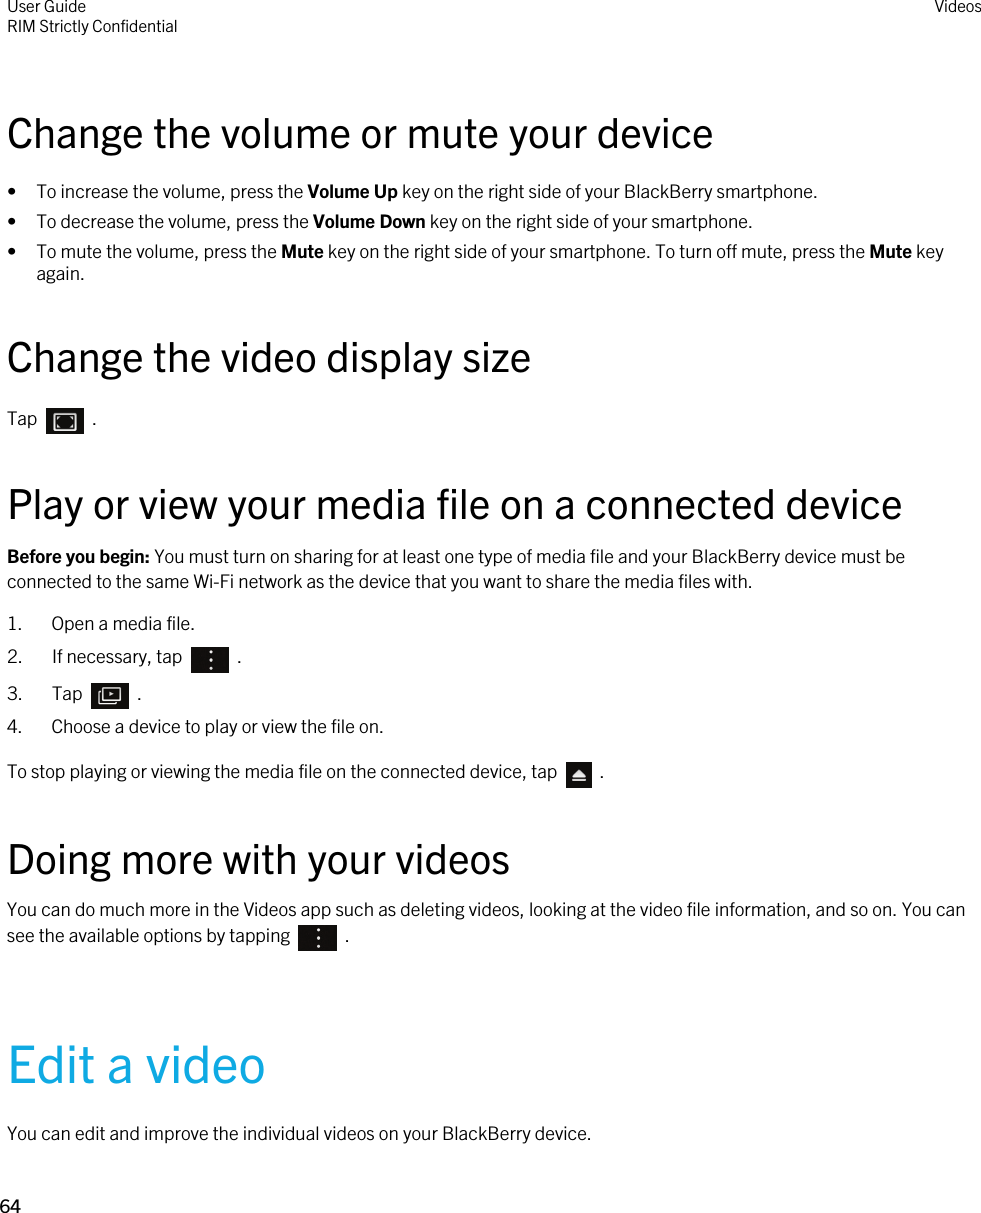 Change the volume or mute your device• To increase the volume, press the Volume Up key on the right side of your BlackBerry smartphone.• To decrease the volume, press the Volume Down key on the right side of your smartphone.• To mute the volume, press the Mute key on the right side of your smartphone. To turn off mute, press the Mute key again.Change the video display sizeTap    .Play or view your media file on a connected deviceBefore you begin: You must turn on sharing for at least one type of media file and your BlackBerry device must be connected to the same Wi-Fi network as the device that you want to share the media files with.1. Open a media file.2.  If necessary, tap    .3.  Tap    .4. Choose a device to play or view the file on.To stop playing or viewing the media file on the connected device, tap    .Doing more with your videosYou can do much more in the Videos app such as deleting videos, looking at the video file information, and so on. You can see the available options by tapping    .Edit a videoYou can edit and improve the individual videos on your BlackBerry device.User GuideRIM Strictly ConfidentialVideos64 